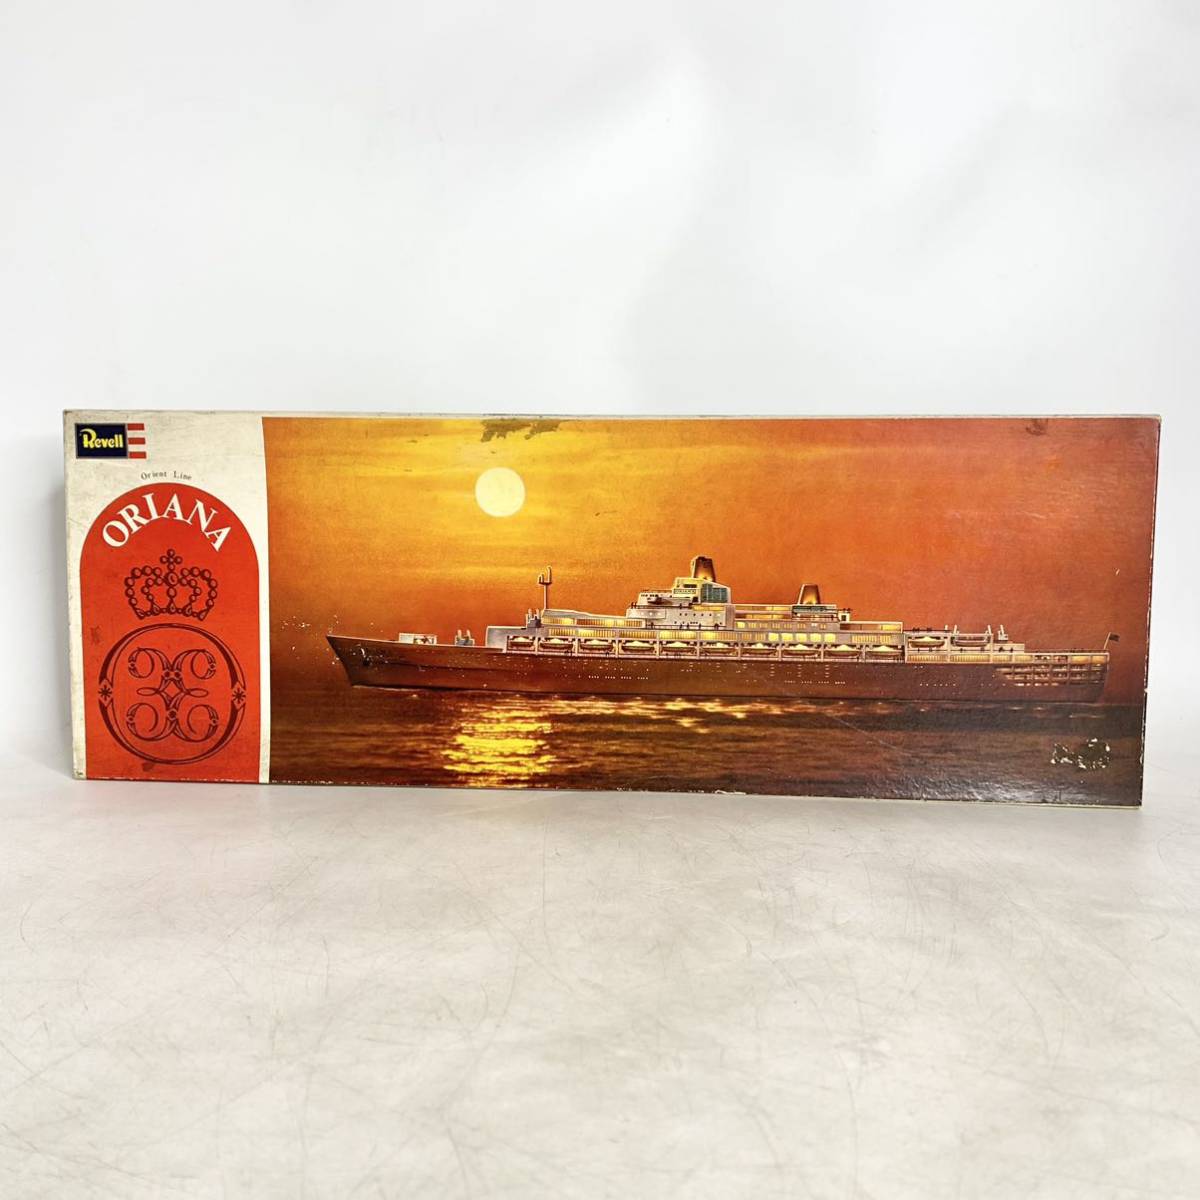  not yet constructed Revell Revell P&O line zo rear na number S.S. ORIANA high speed gorgeous passenger boat plastic model H-338 present condition goods 